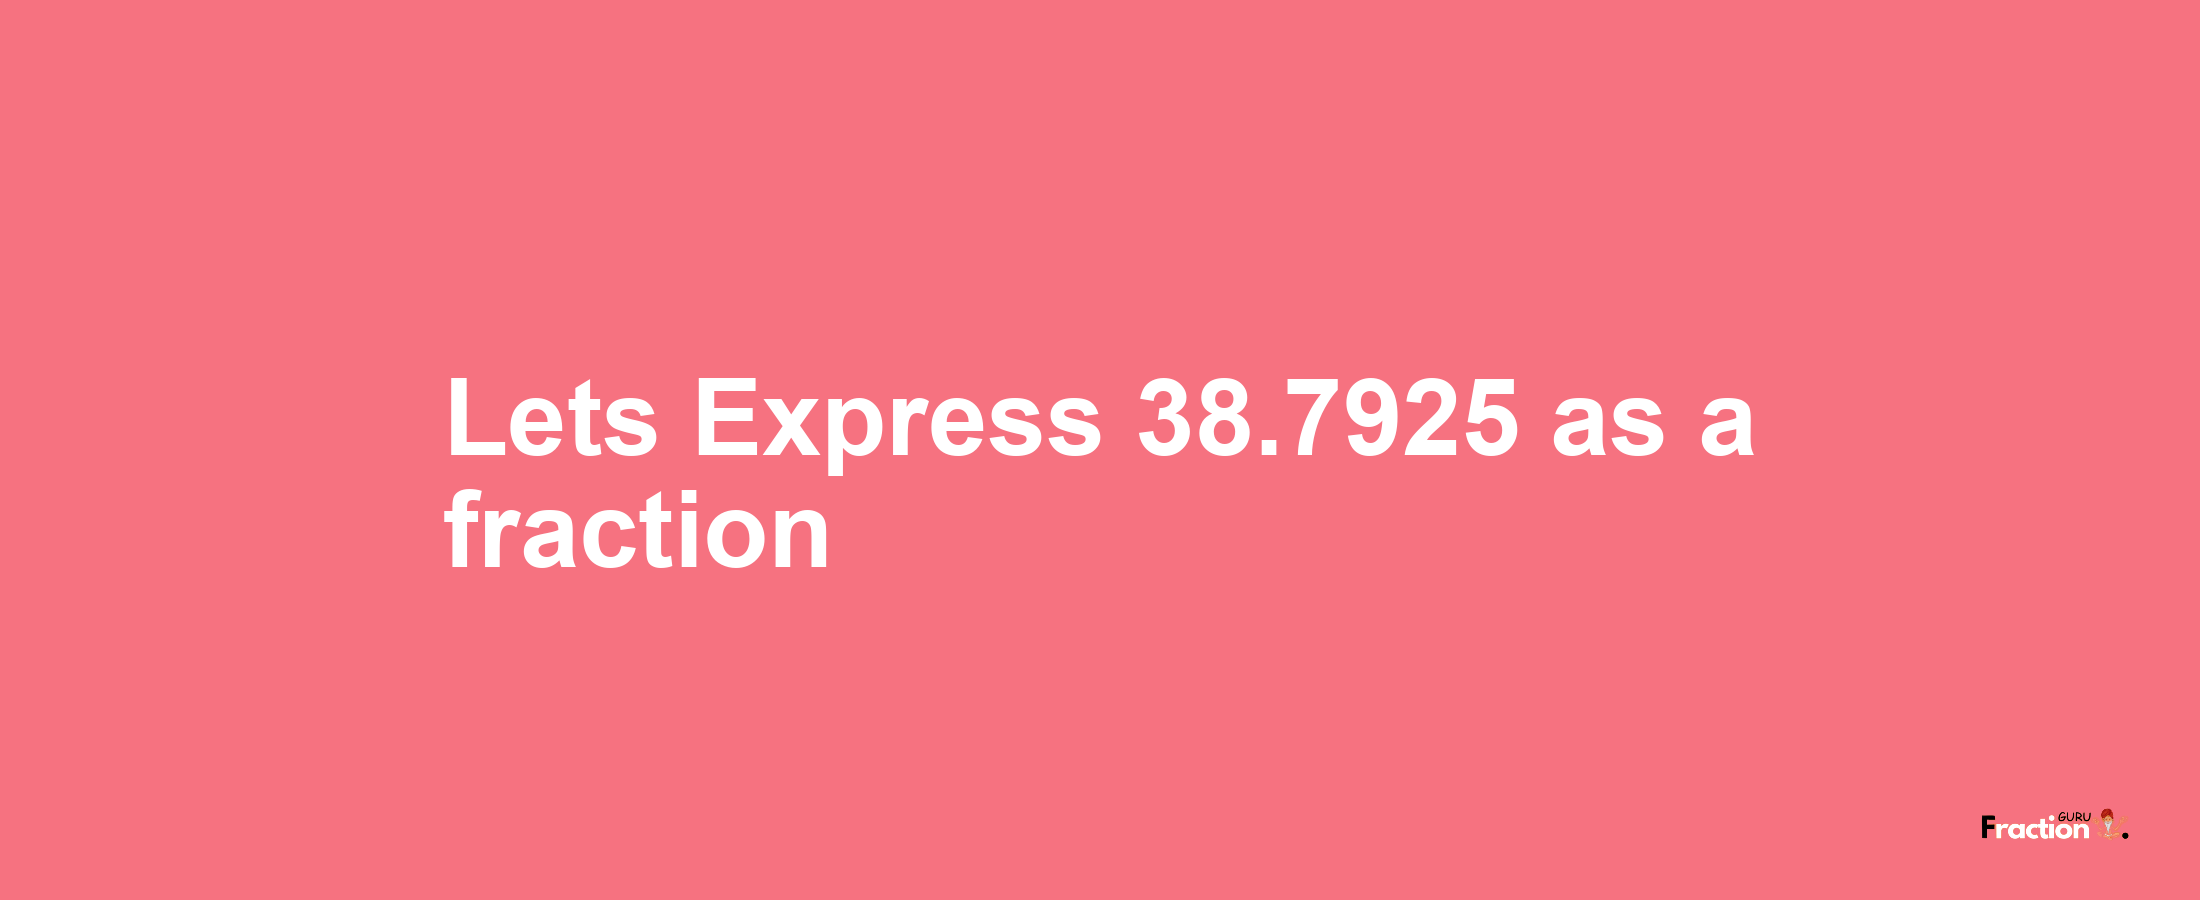 Lets Express 38.7925 as afraction